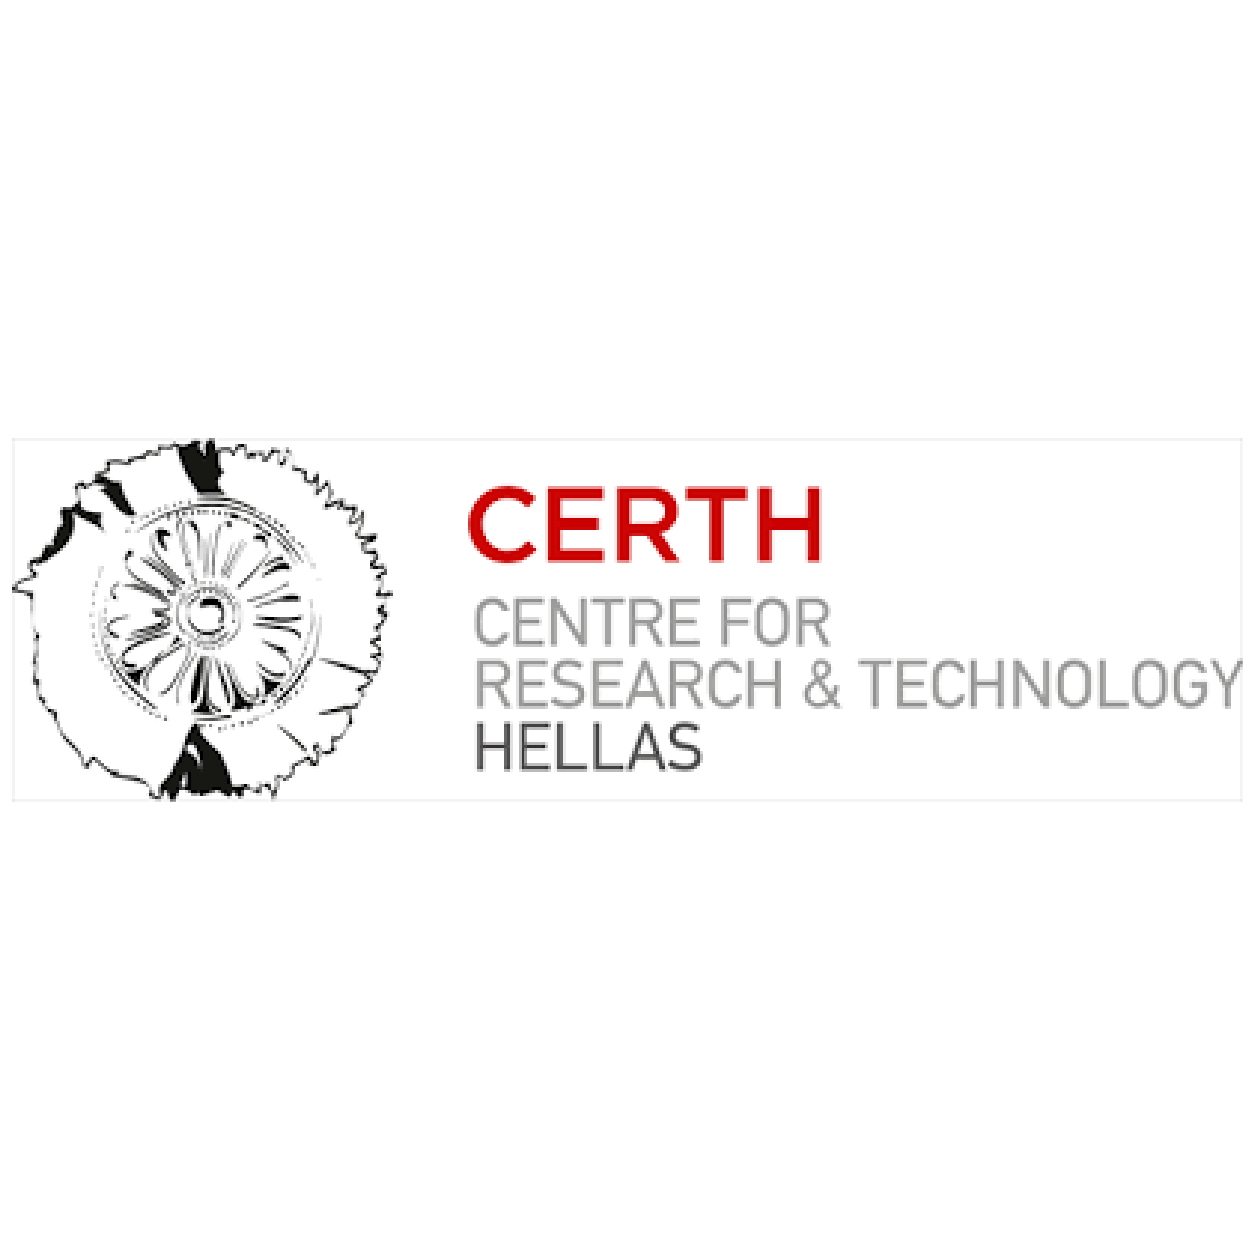 CERTH – Centre for Research and Technology Hellas